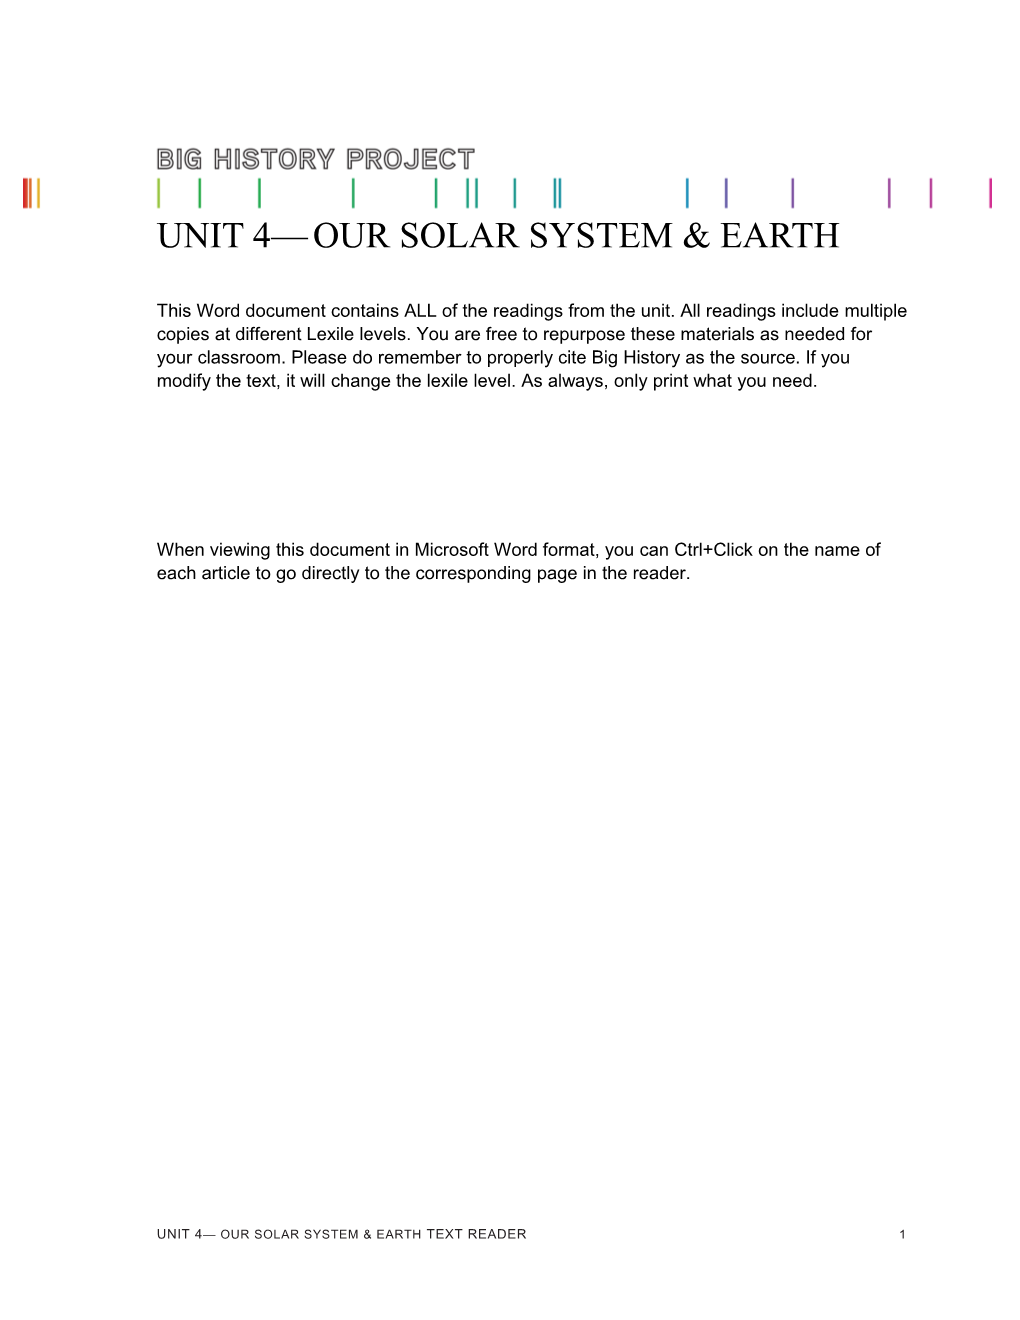 Unit 4 Our Solar System & Earth s1